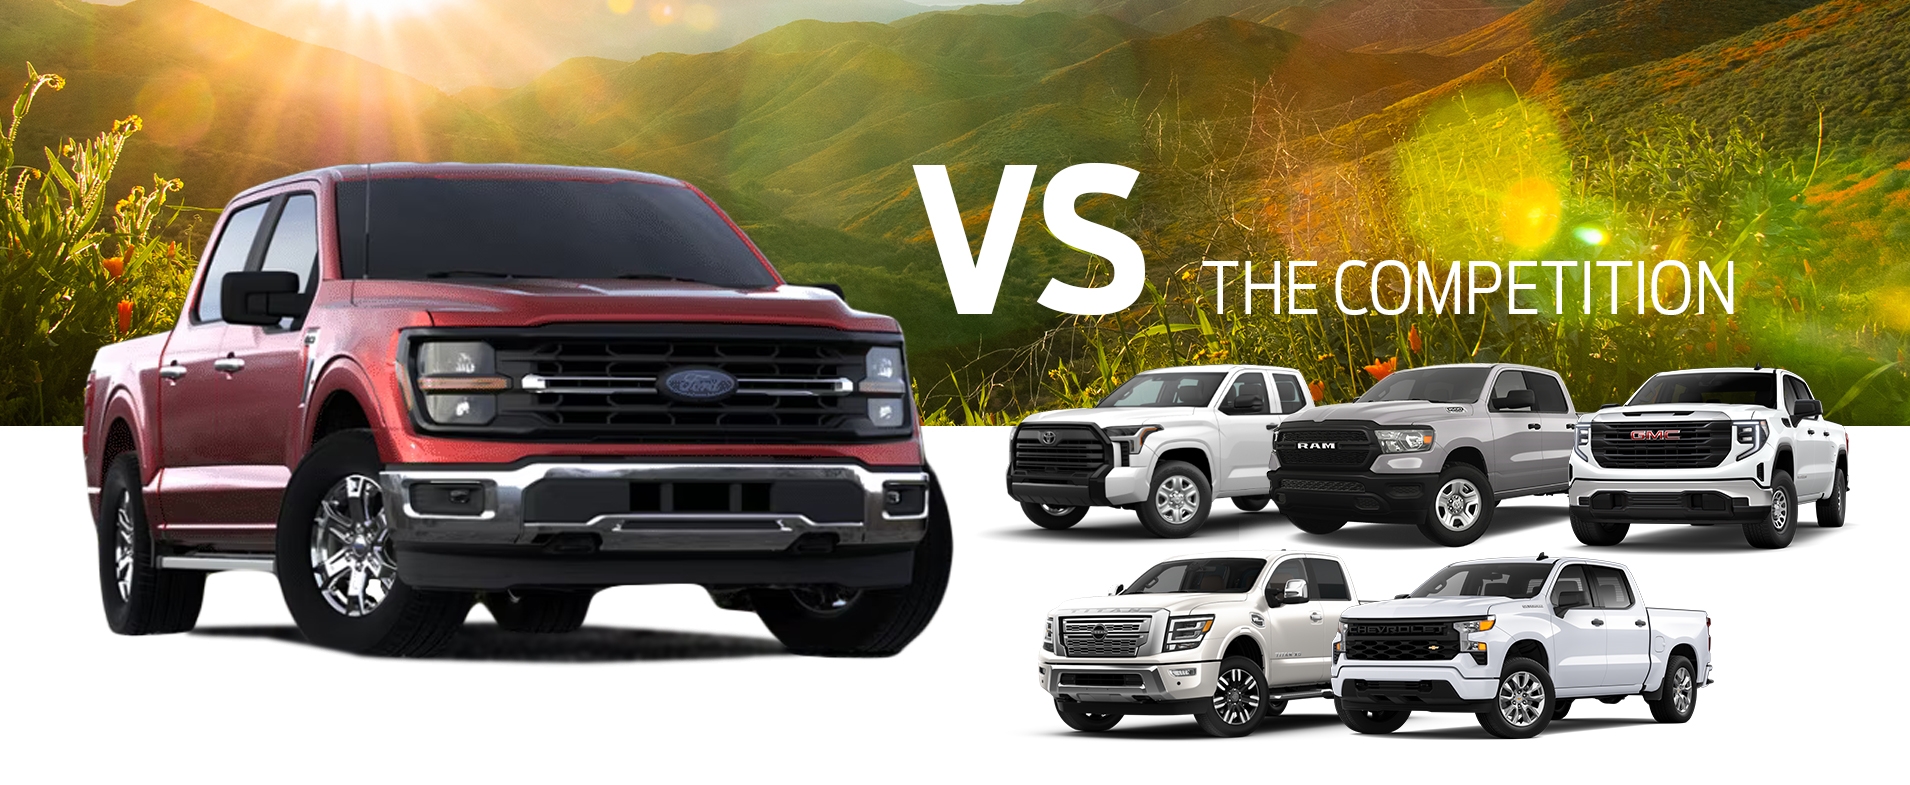 F-150 vs Competition